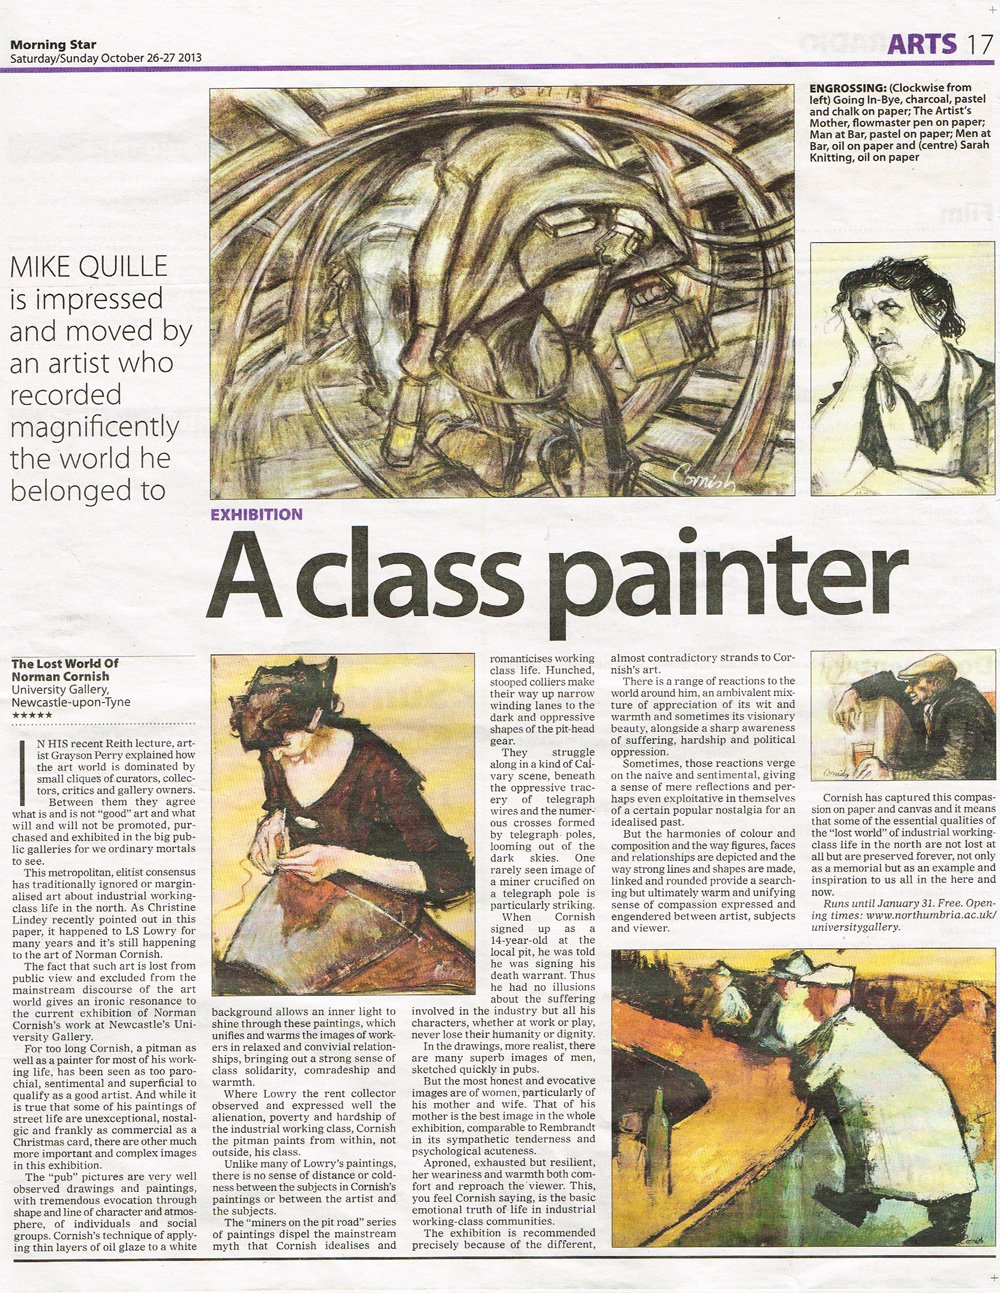 Newspaper article about Norman Cornish from the Morning Star